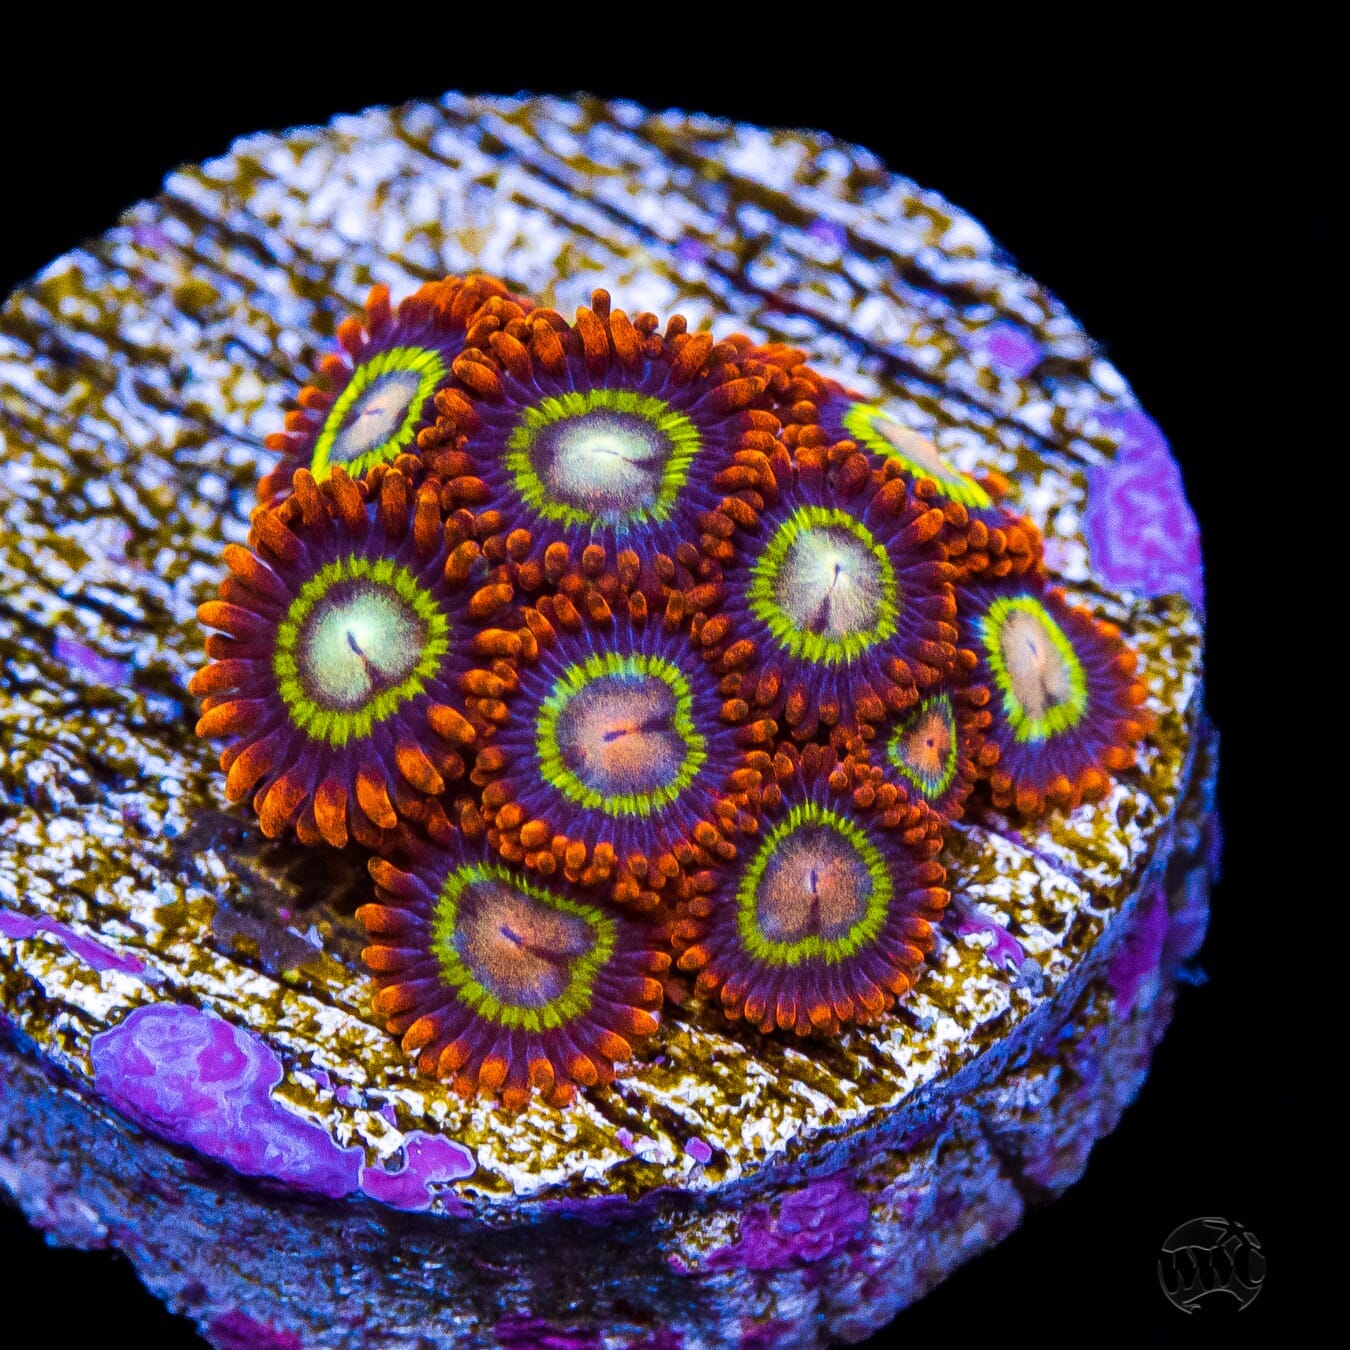 Treehouse of Horrors Zoanthids